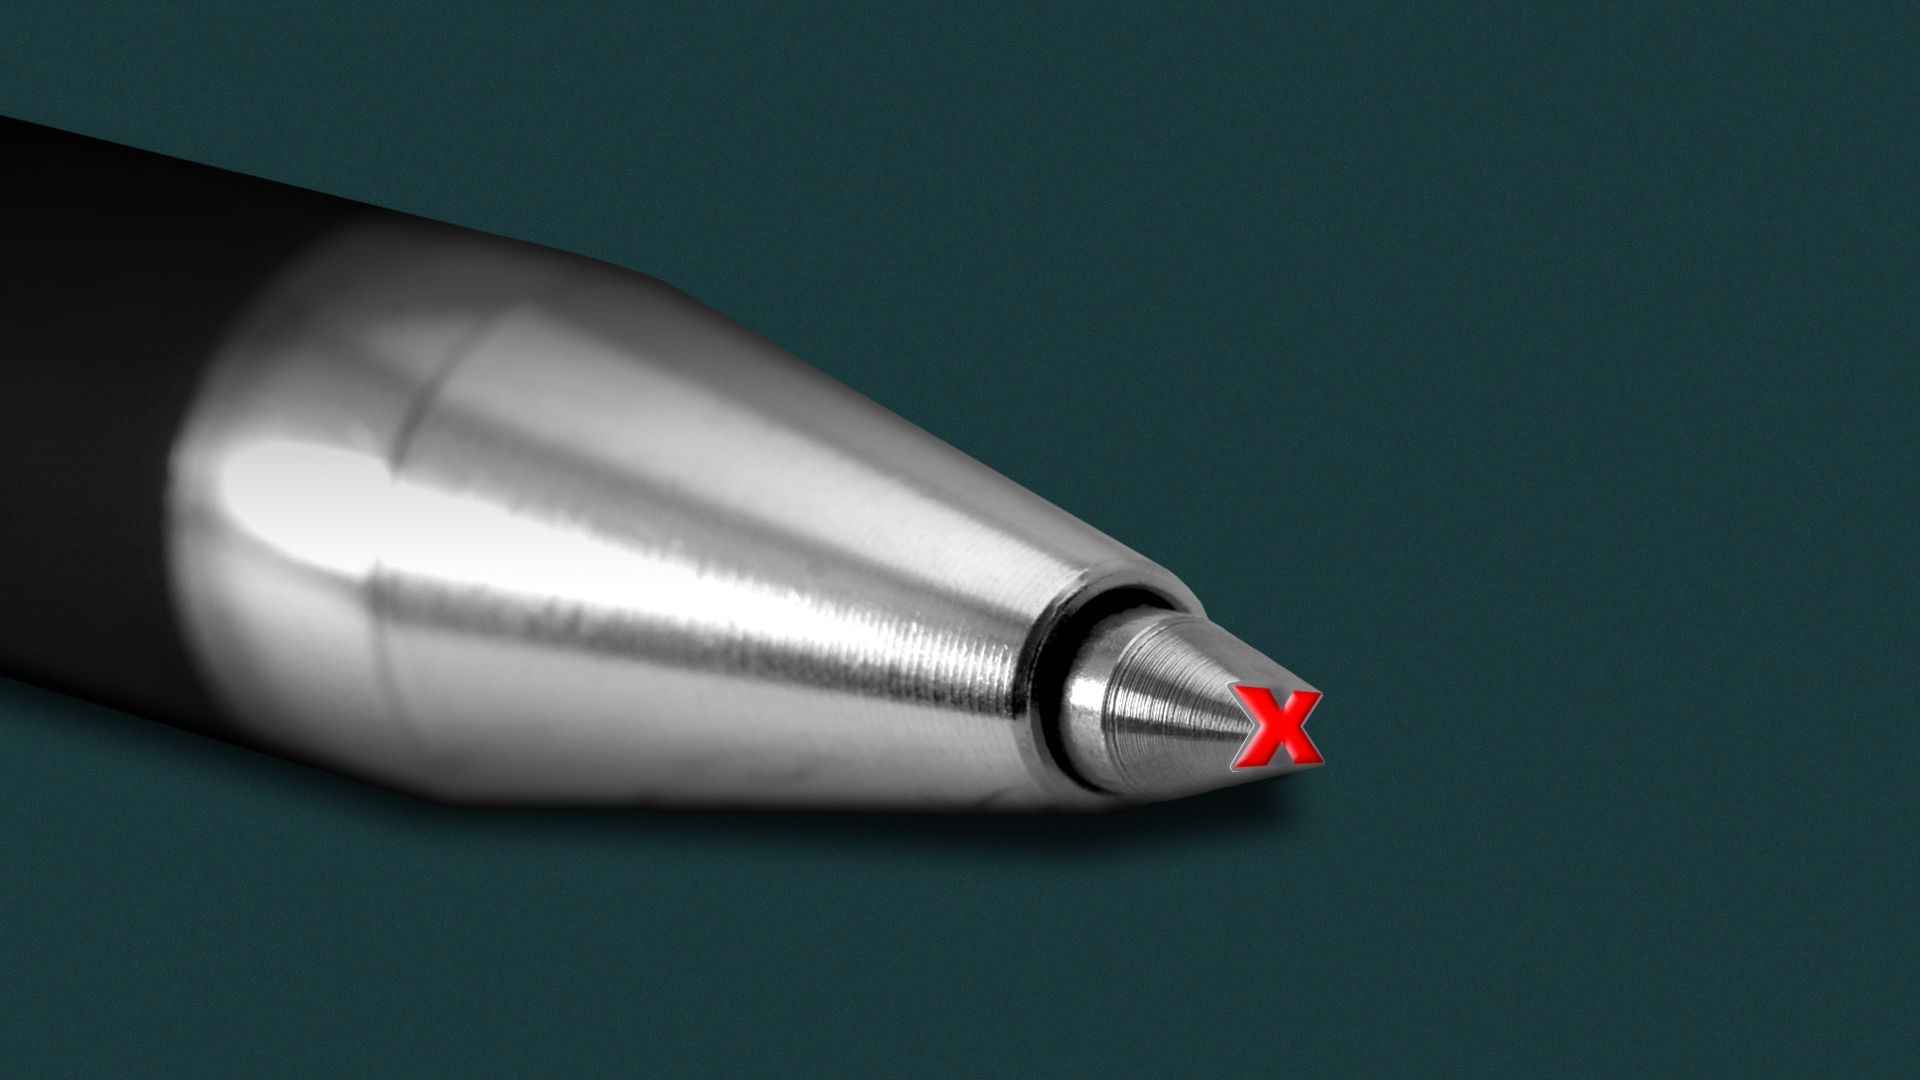 Illustration of a ballpoint pen with a red "X"  in place of the ballpoint